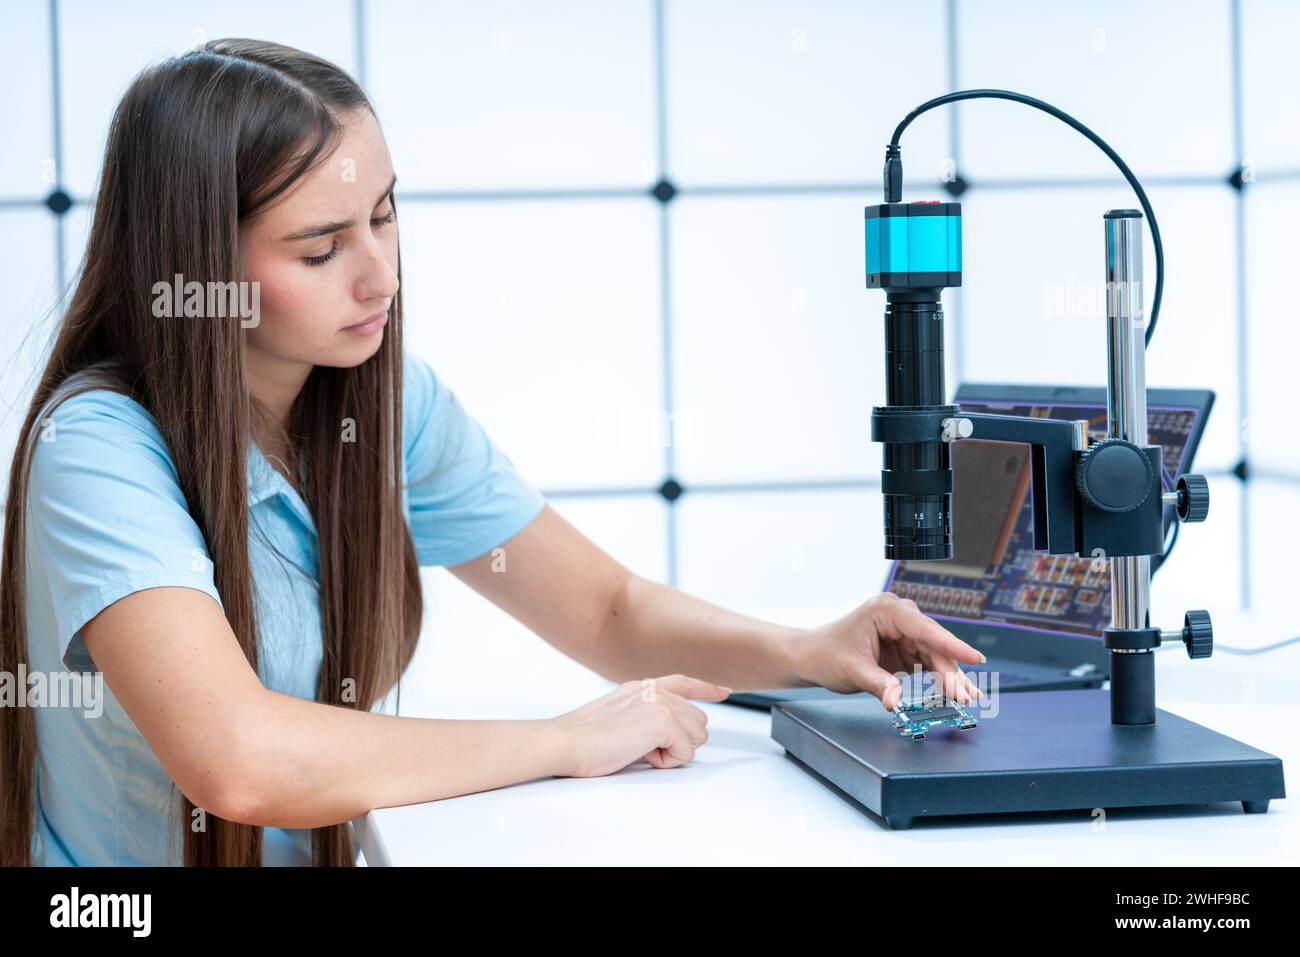 Scientist testing microelectronic device Stock Photo